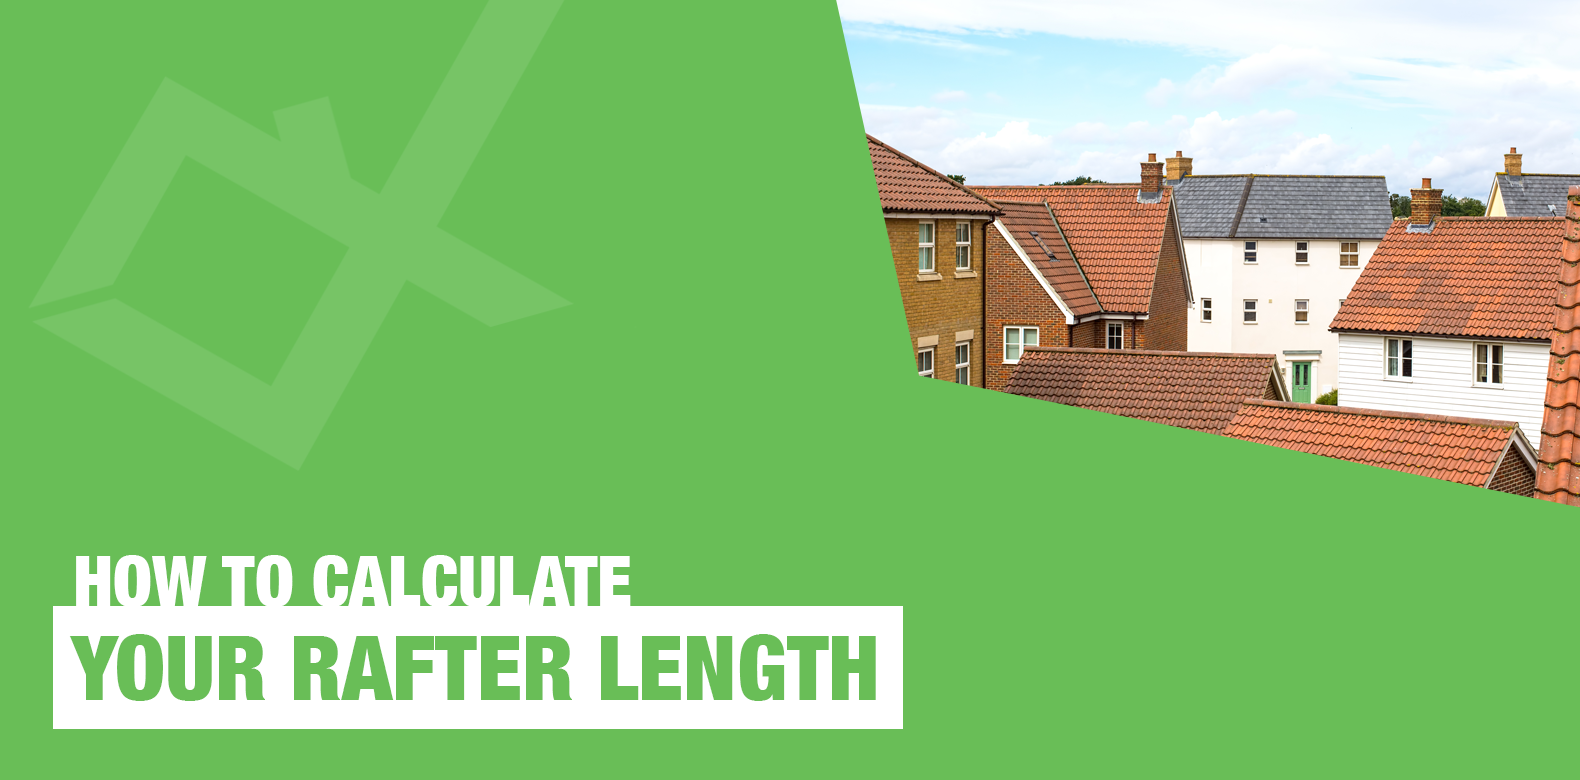 How To Calculate Your Rafter Length!